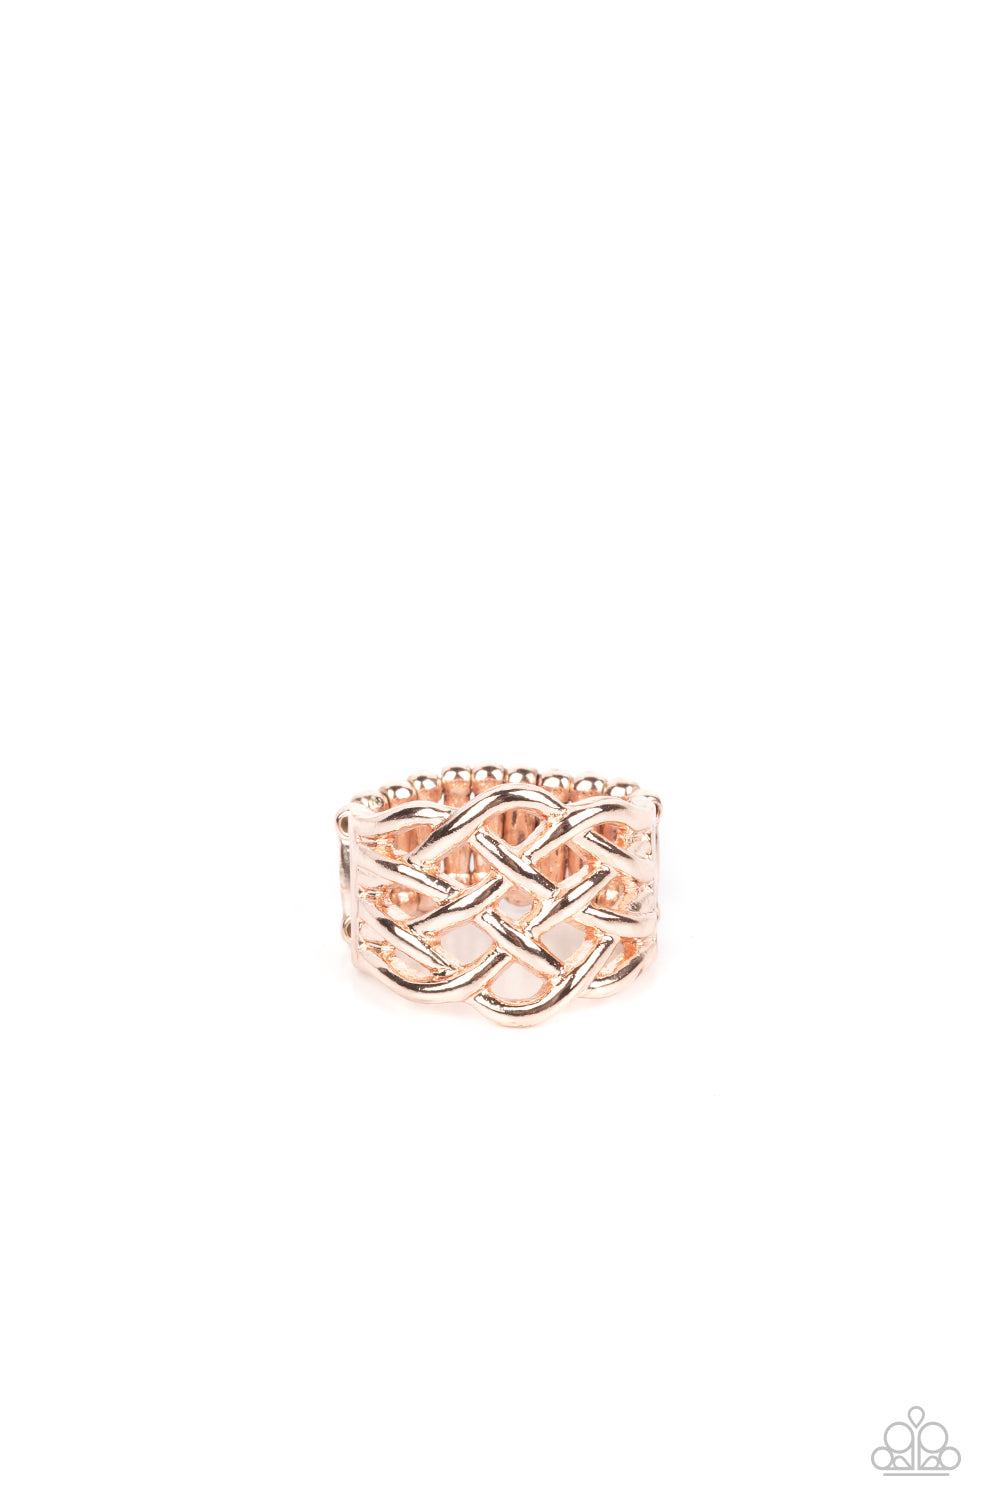 Paparazzi Accessories The One That KNOT Away - Rose Gold